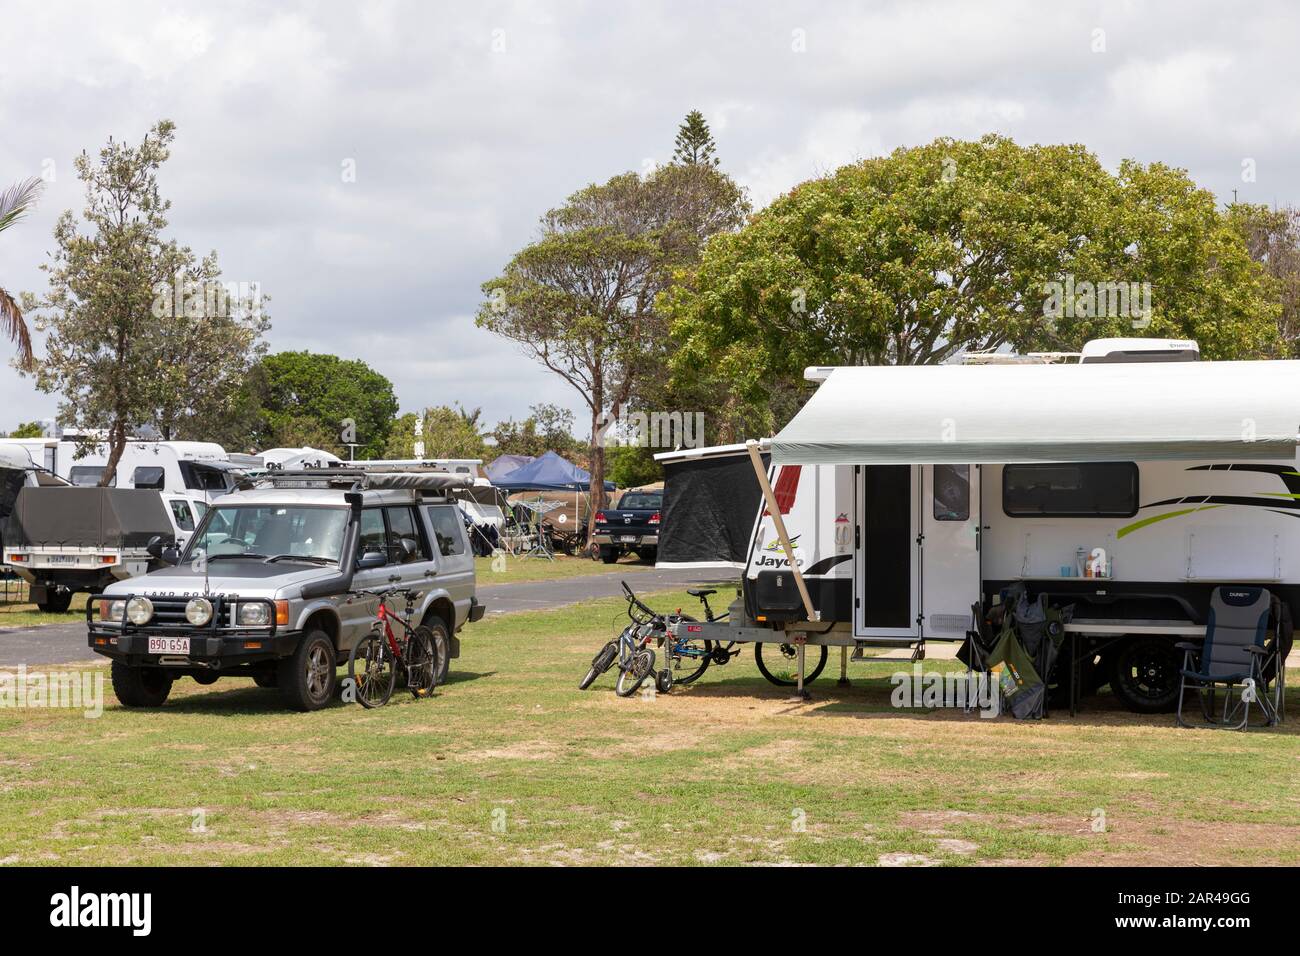 Caravan and camping site at Lennox Head in Northern New South Wales,Australia,2020 Stock Photo